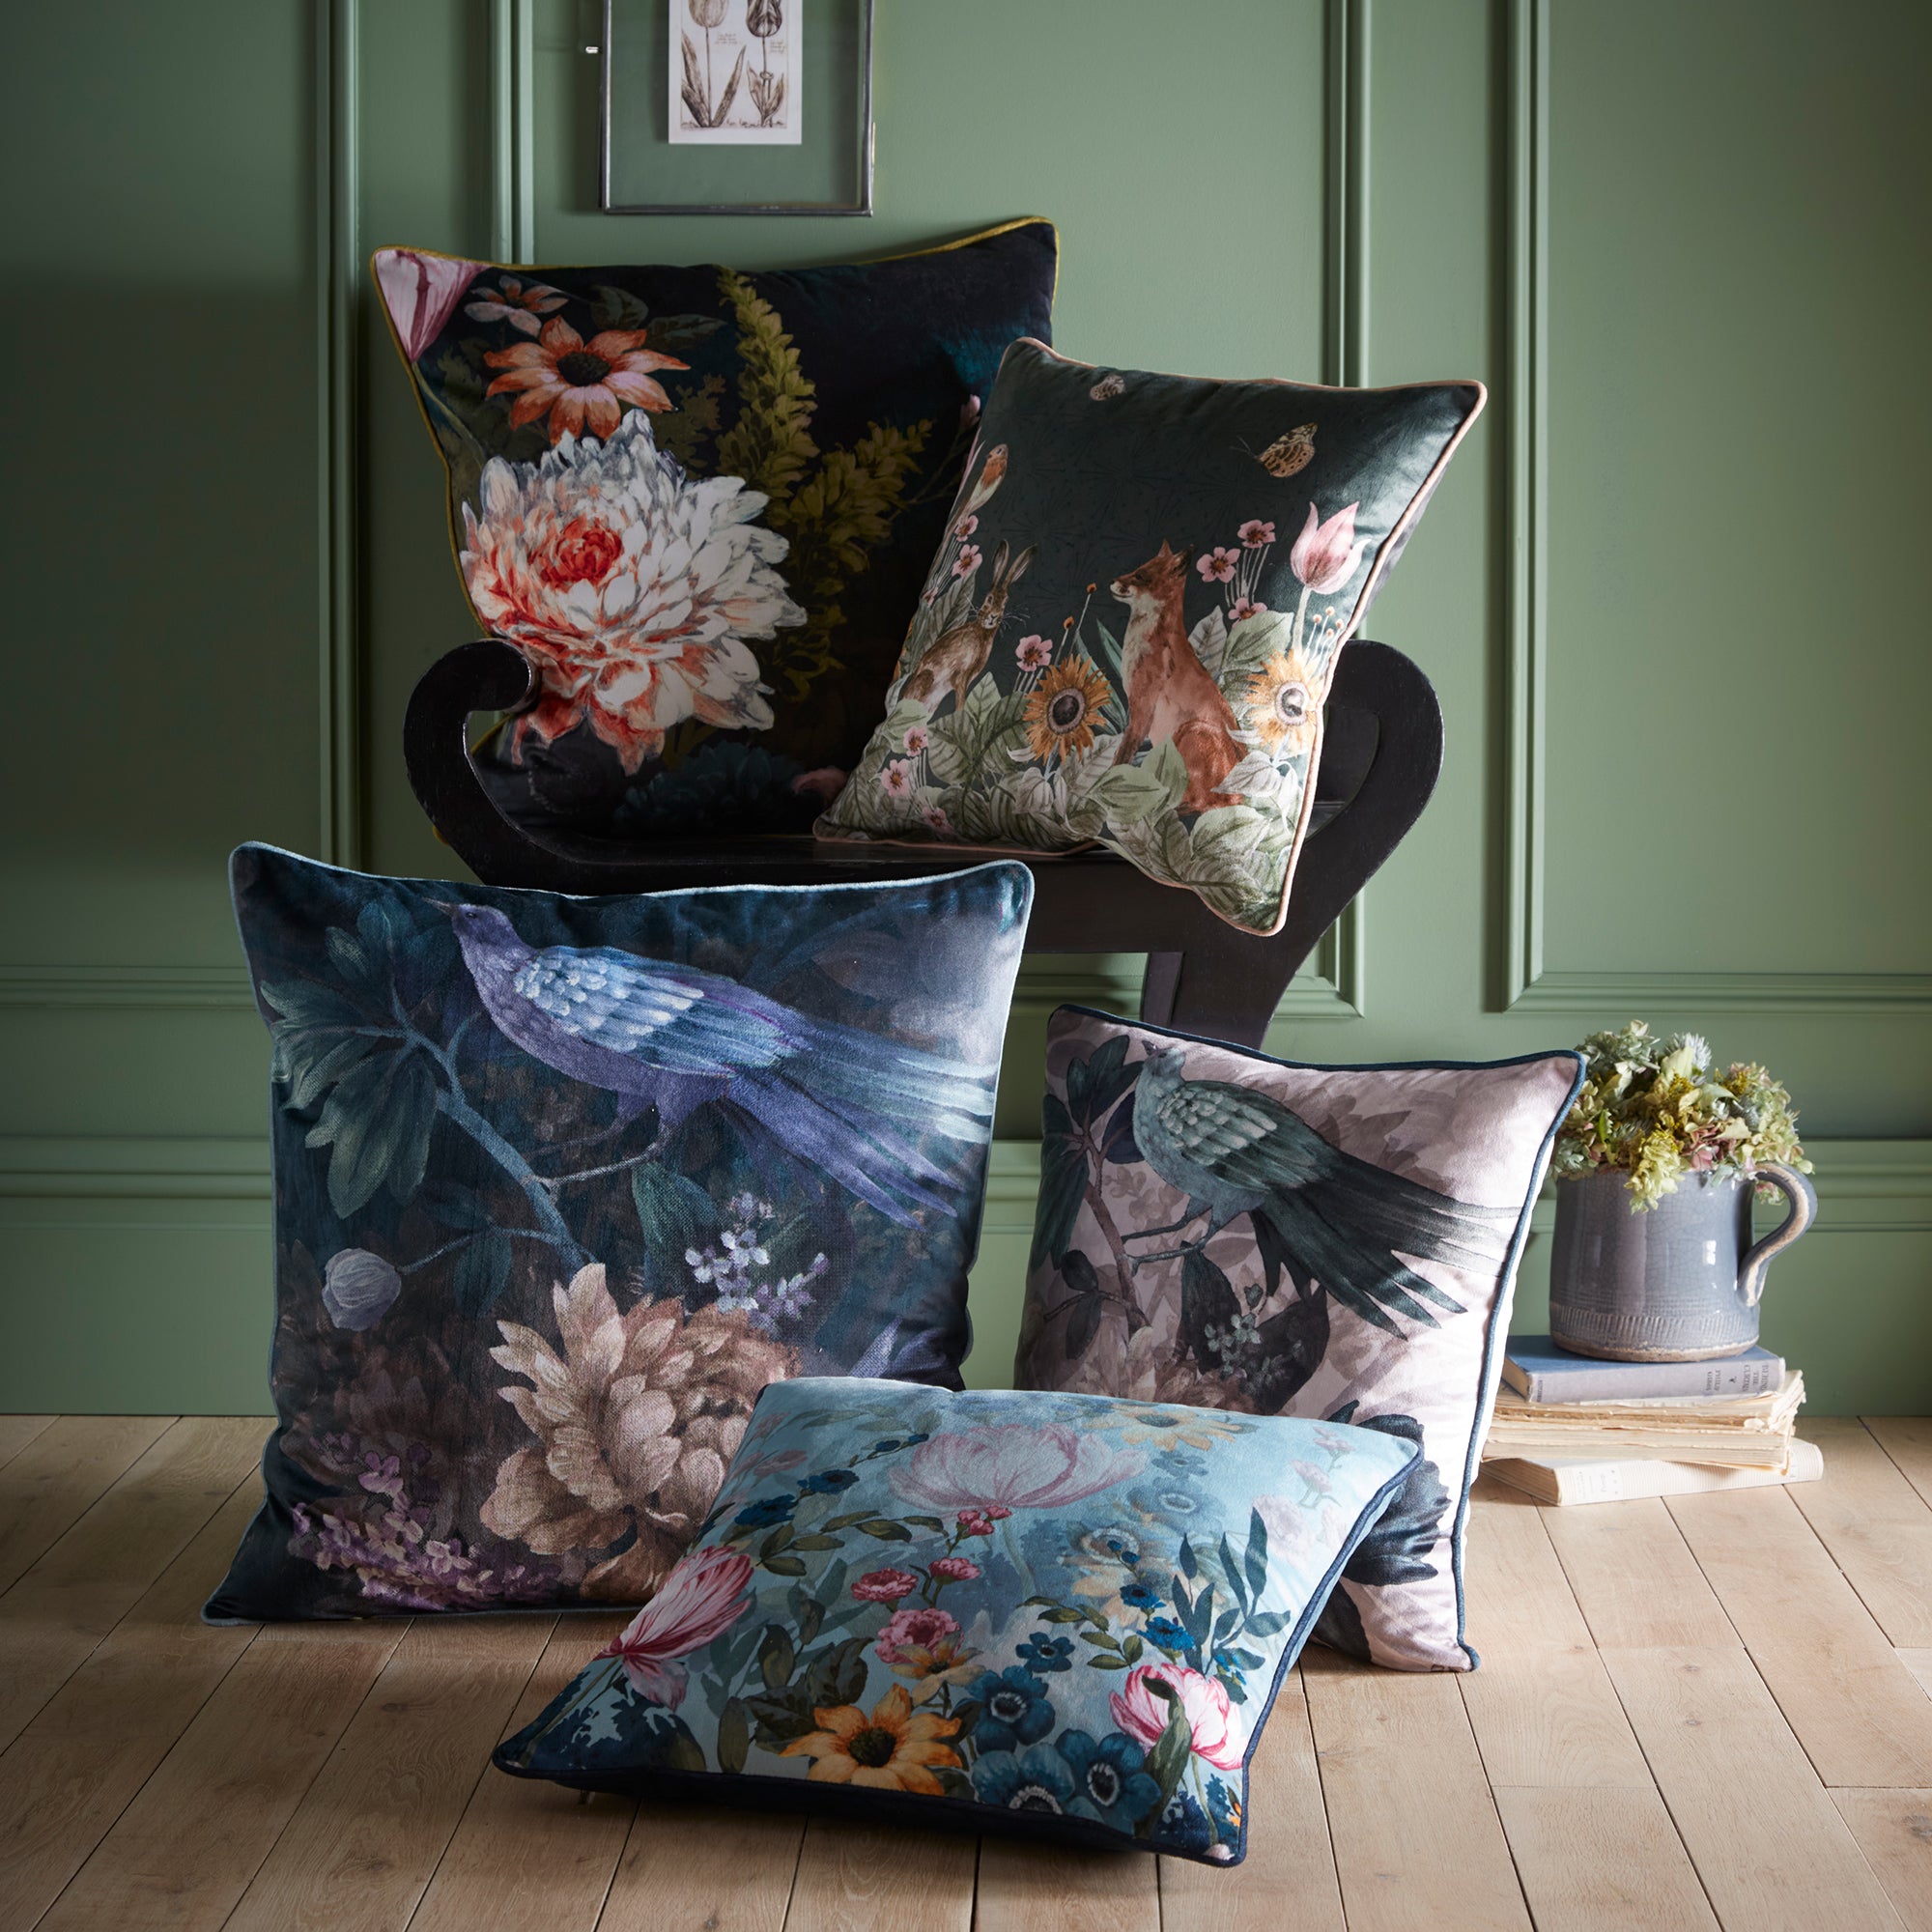 Filled Cushion Kennington by Appletree Heritage in Multi